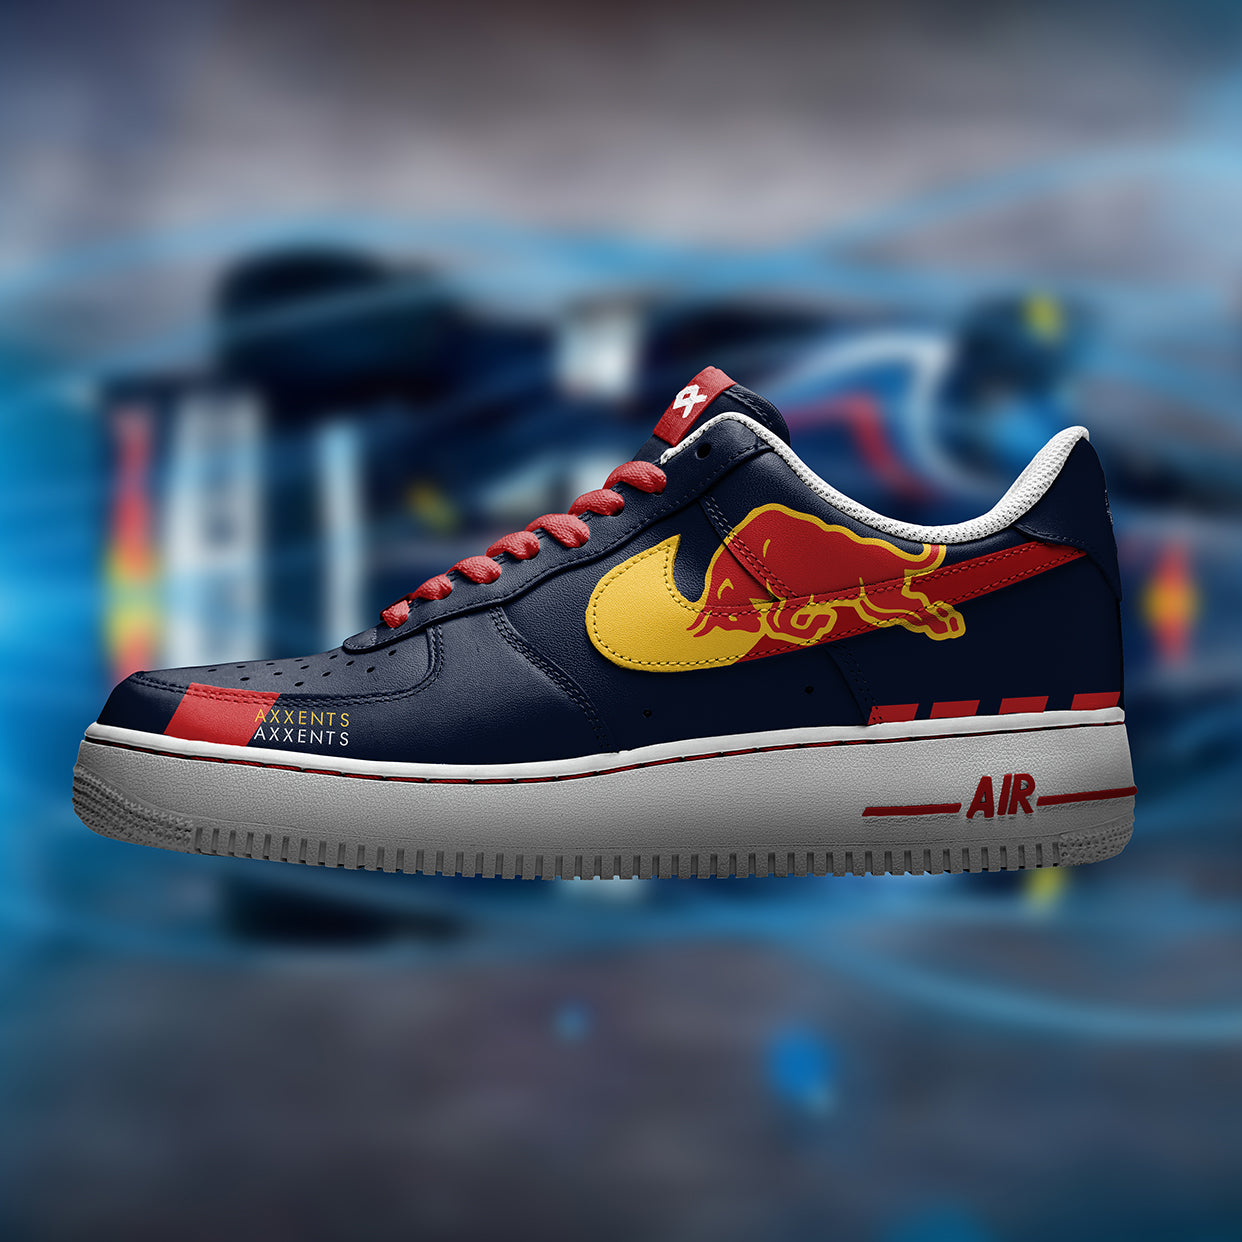 F1 RBULL" Nike AF1 1 Collection) axxents